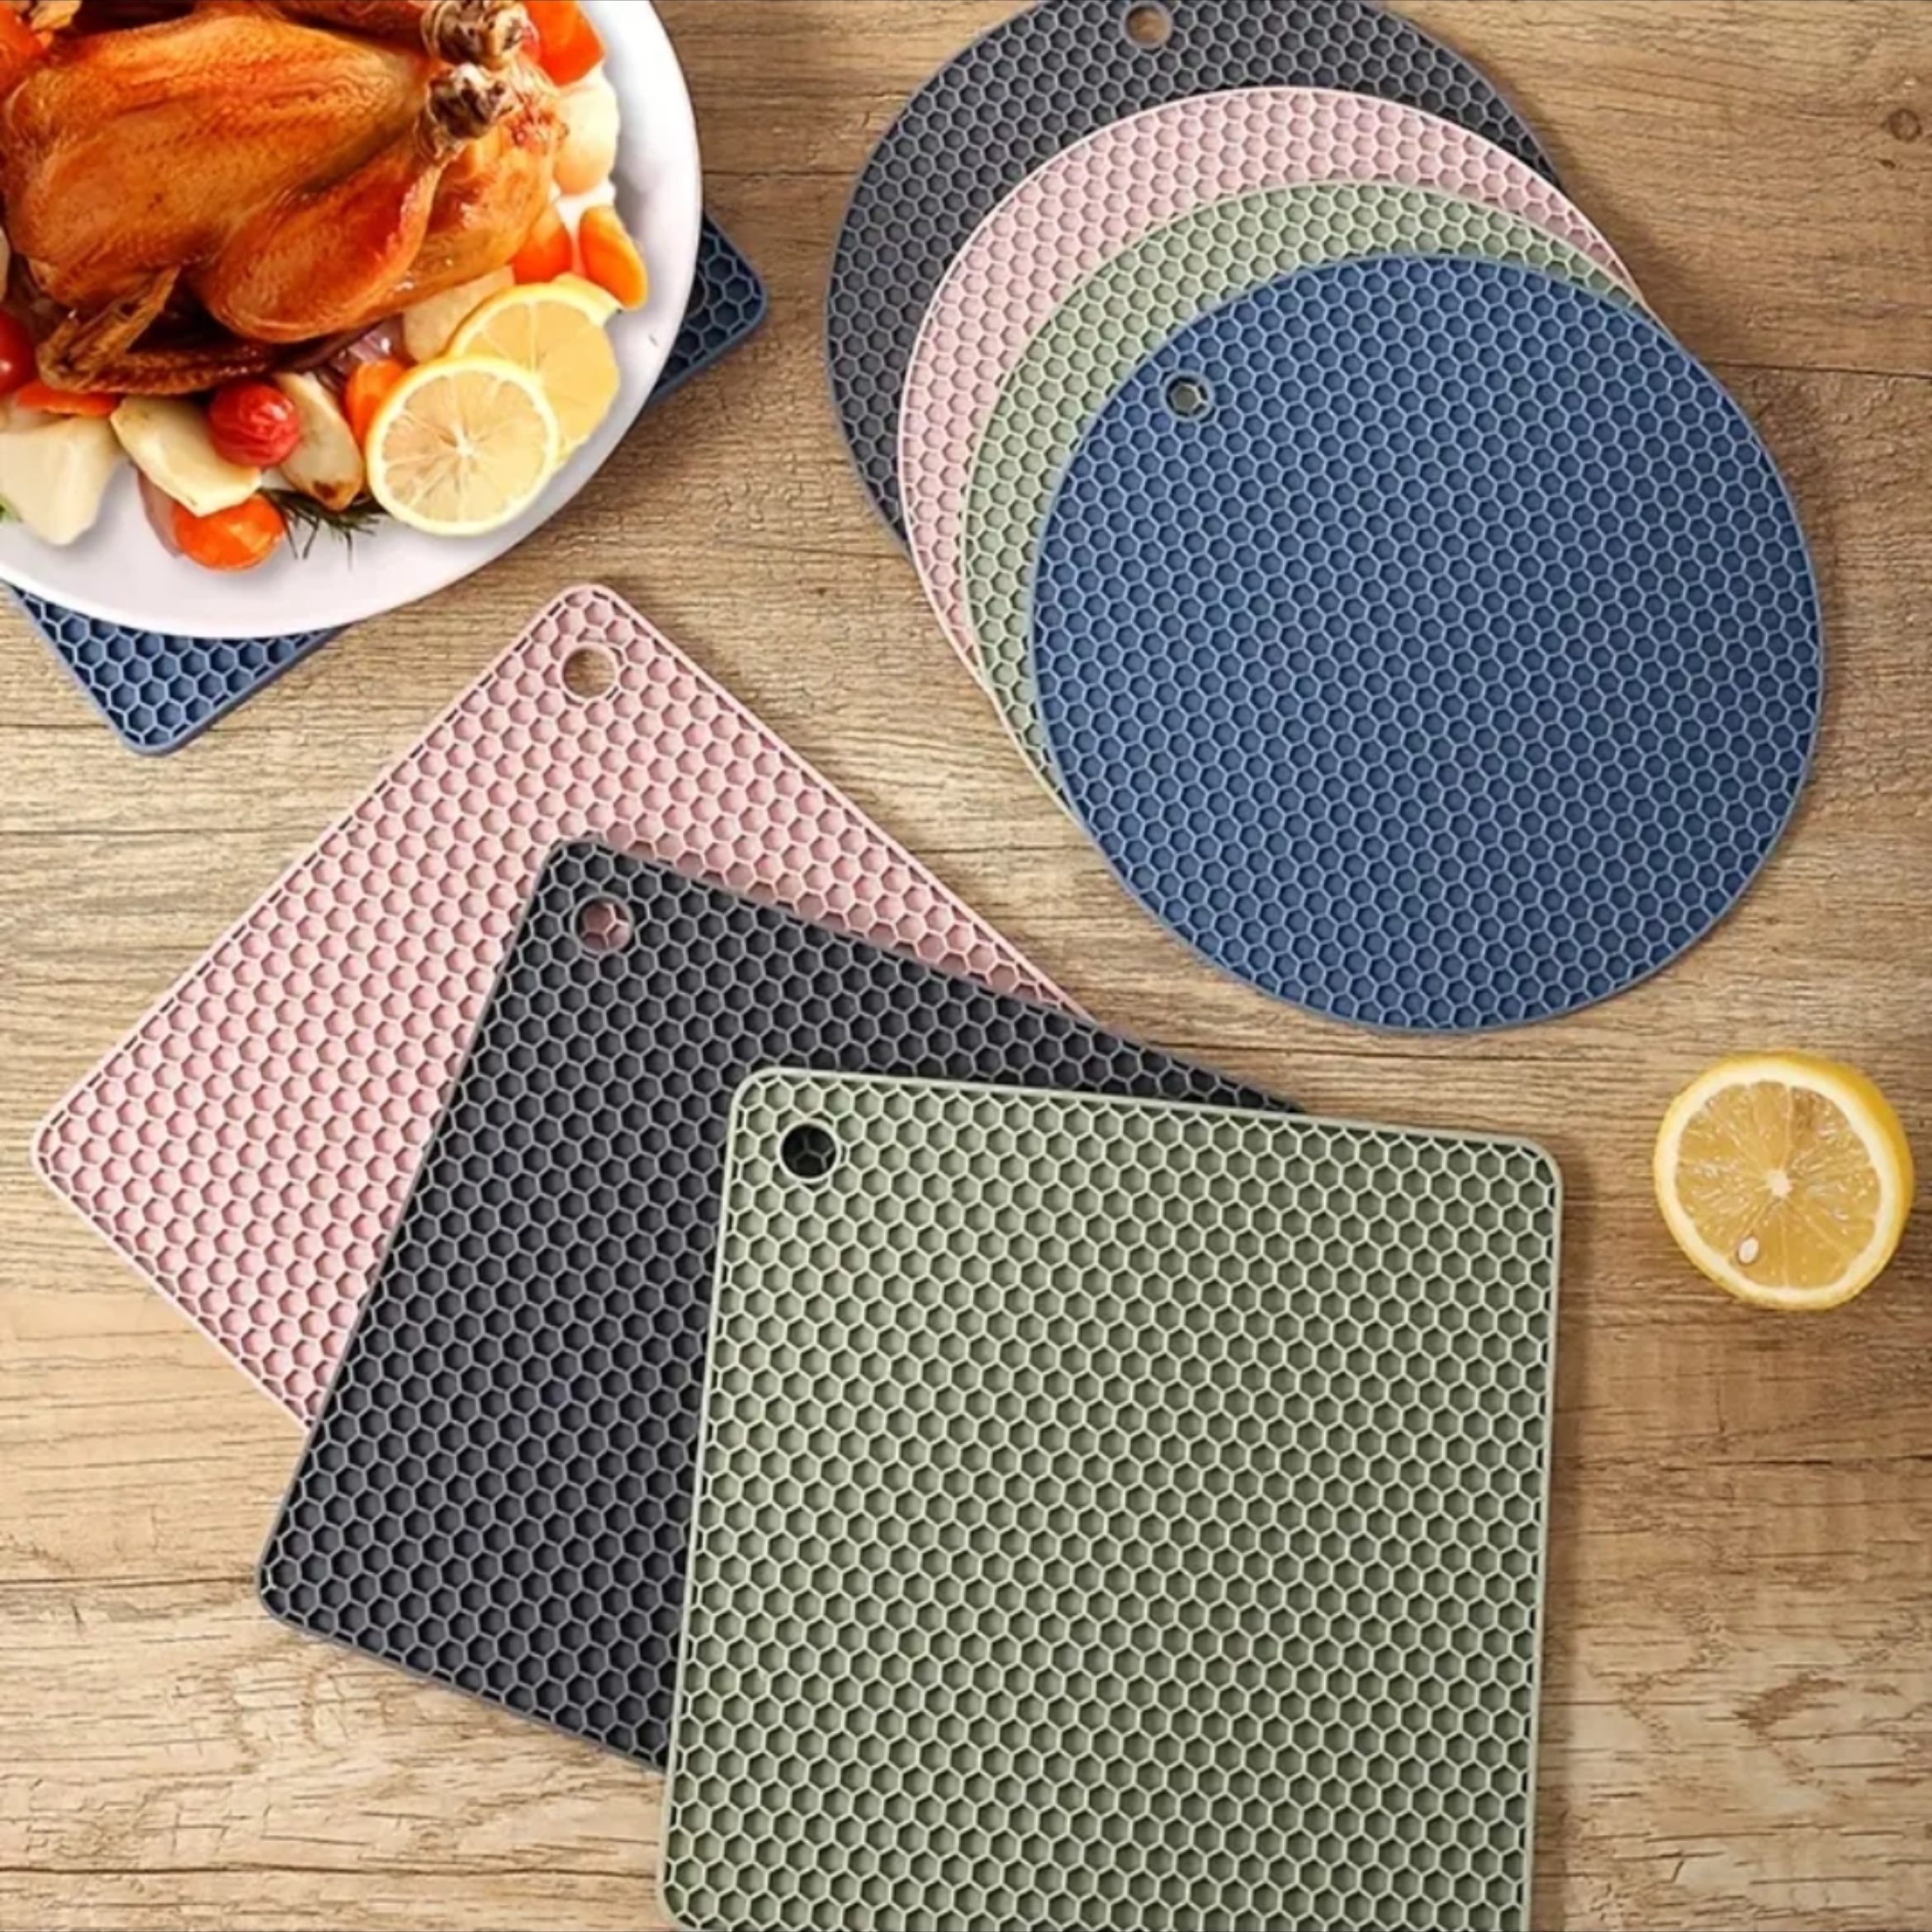 2pcs, Silicone Mats For Kitchen Counter, Non-Slip Waterproof Countertop  Protector Mat, Heat Resistant Mat, Silicone Craft Mat, Silicone Placemat,  Kitc